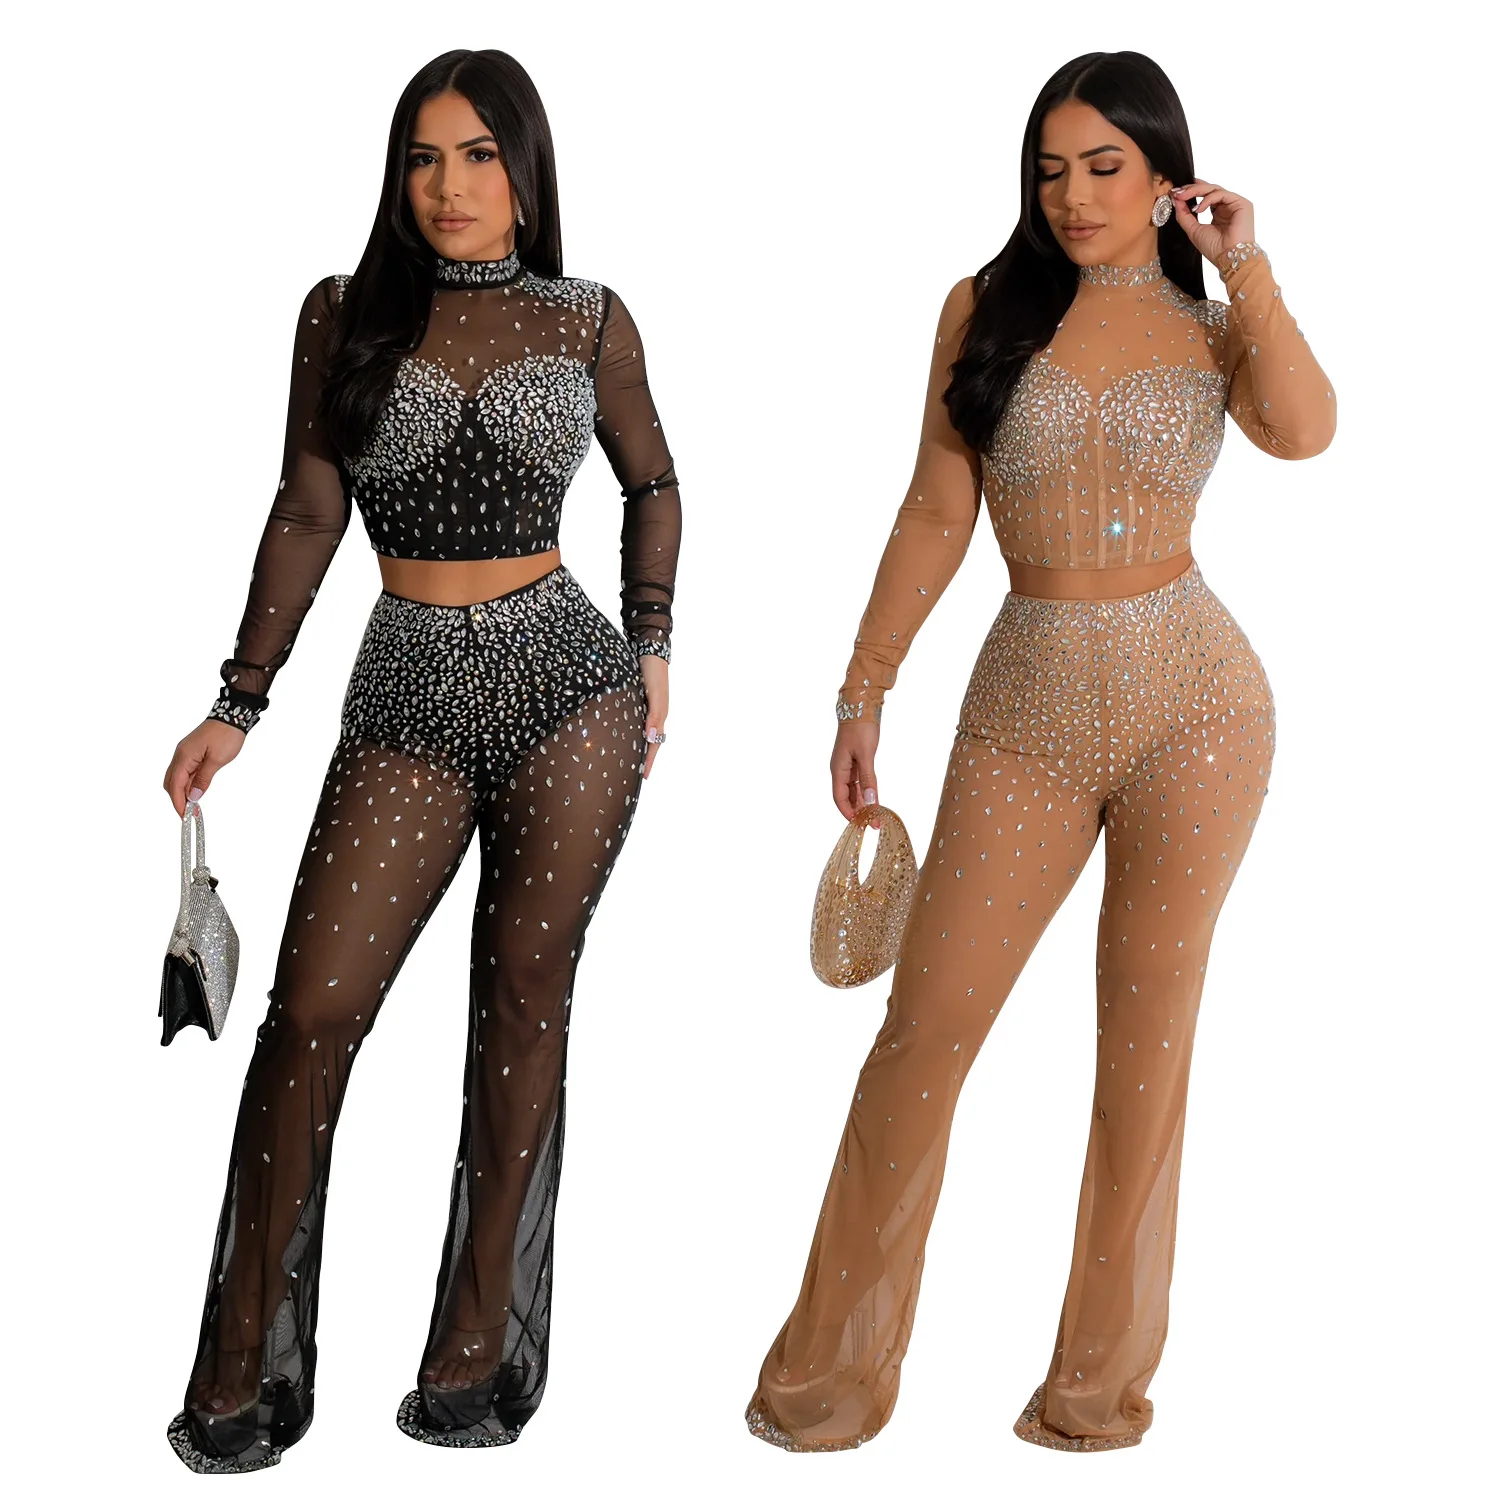 EINYOO Y2k Rhinestone Mesh See Through Long Sleeve Dresses Set for Women Birthday Sexy Night Club Party 2 Piece Sets Outfit Traf bkd new rhinestone sexy mesh see through bodysuits with socks women clothes hollow out backless long sleeve one pieces outfits